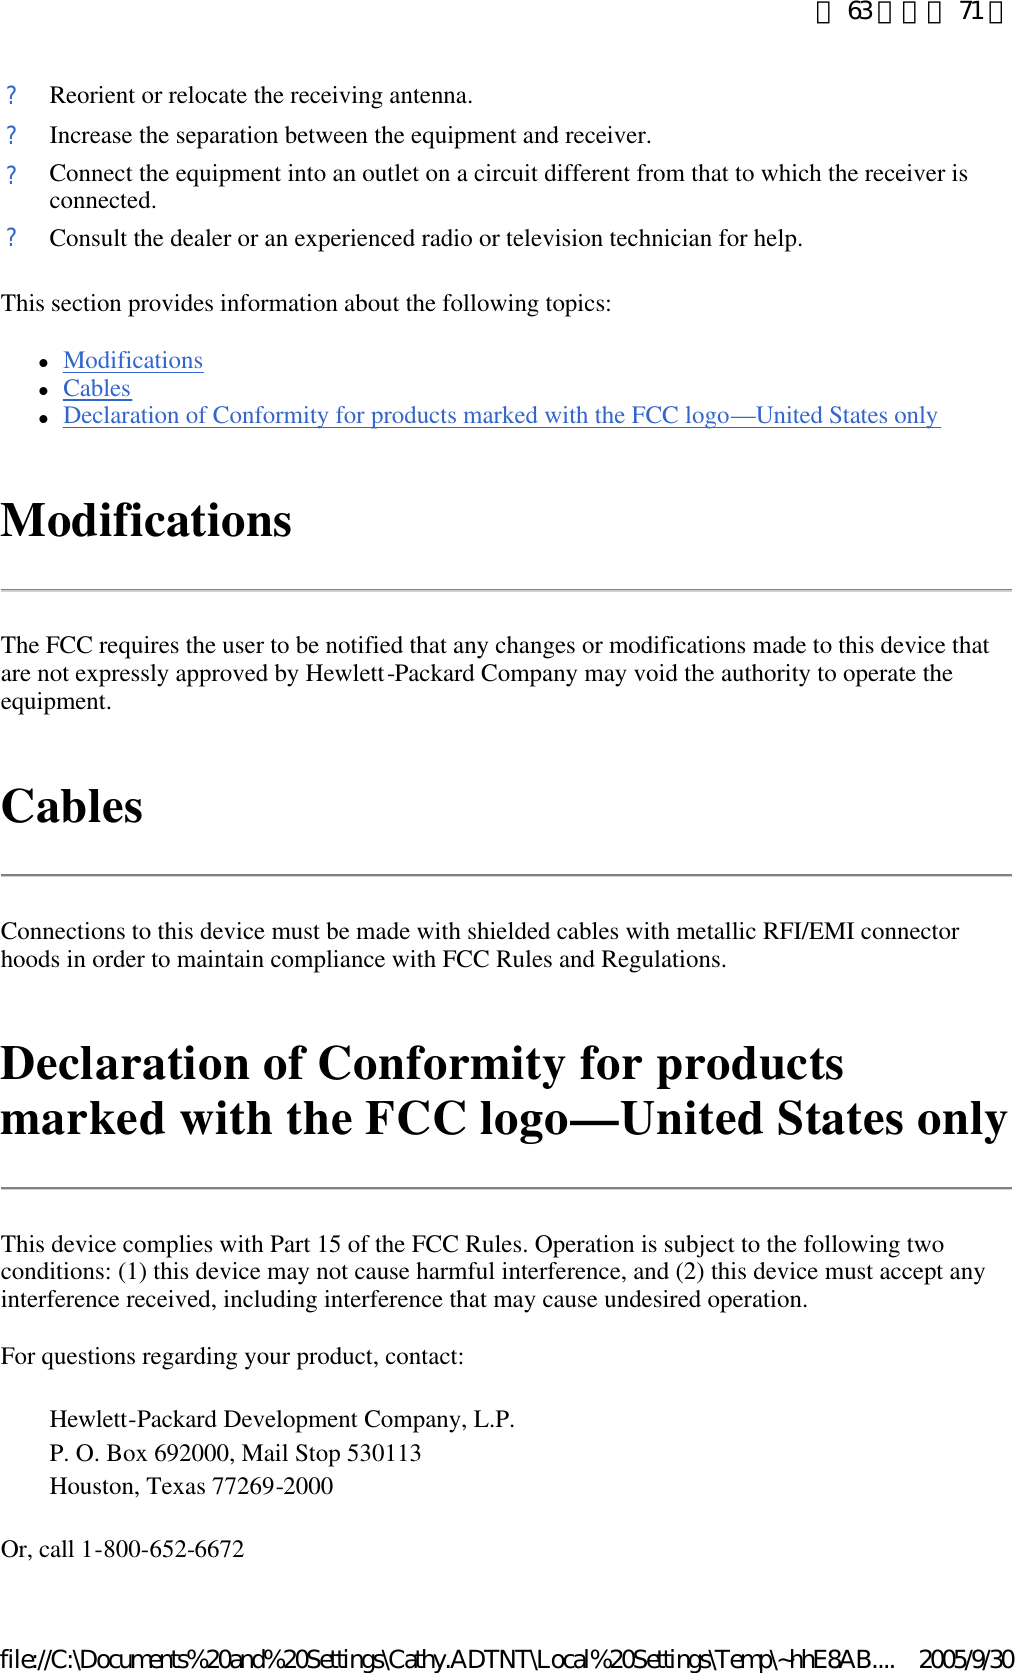 This section provides information about the following topics:  lModifications  lCables  lDeclaration of Conformity for products marked with the FCC logo—United States only  Modifications The FCC requires the user to be notified that any changes or modifications made to this device that are not expressly approved by Hewlett-Packard Company may void the authority to operate the equipment.  Cables Connections to this device must be made with shielded cables with metallic RFI/EMI connector hoods in order to maintain compliance with FCC Rules and Regulations.  Declaration of Conformity for products marked with the FCC logo—United States only This device complies with Part 15 of the FCC Rules. Operation is subject to the following two conditions: (1) this device may not cause harmful interference, and (2) this device must accept any interference received, including interference that may cause undesired operation.  For questions regarding your product, contact:  Or, call 1-800-652-6672 ?Reorient or relocate the receiving antenna. ?Increase the separation between the equipment and receiver. ?Connect the equipment into an outlet on a circuit different from that to which the receiver is connected. ?Consult the dealer or an experienced radio or television technician for help. Hewlett-Packard Development Company, L.P. P. O. Box 692000, Mail Stop 530113Houston, Texas 77269-2000第 63 頁，共 71 頁2005/9/30file://C:\Documents%20and%20Settings\Cathy.ADTNT\Local%20Settings\Temp\~hhE8AB....